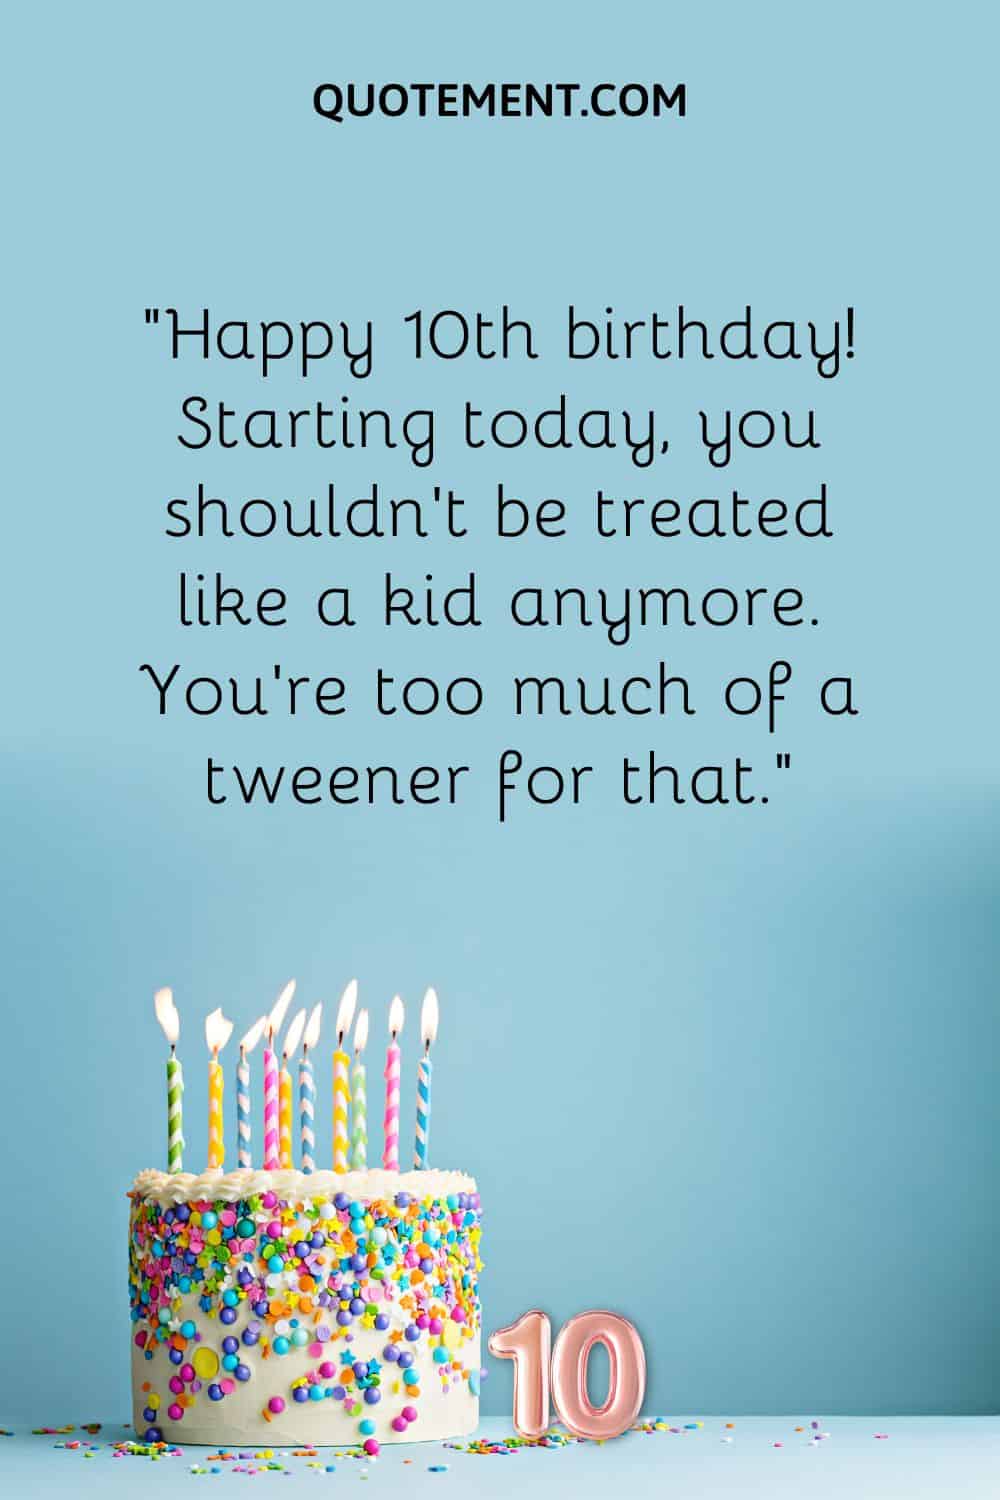 “Happy 10th birthday! Starting today, you shouldn't be treated like a kid anymore. You're too much of a tweener for that.”